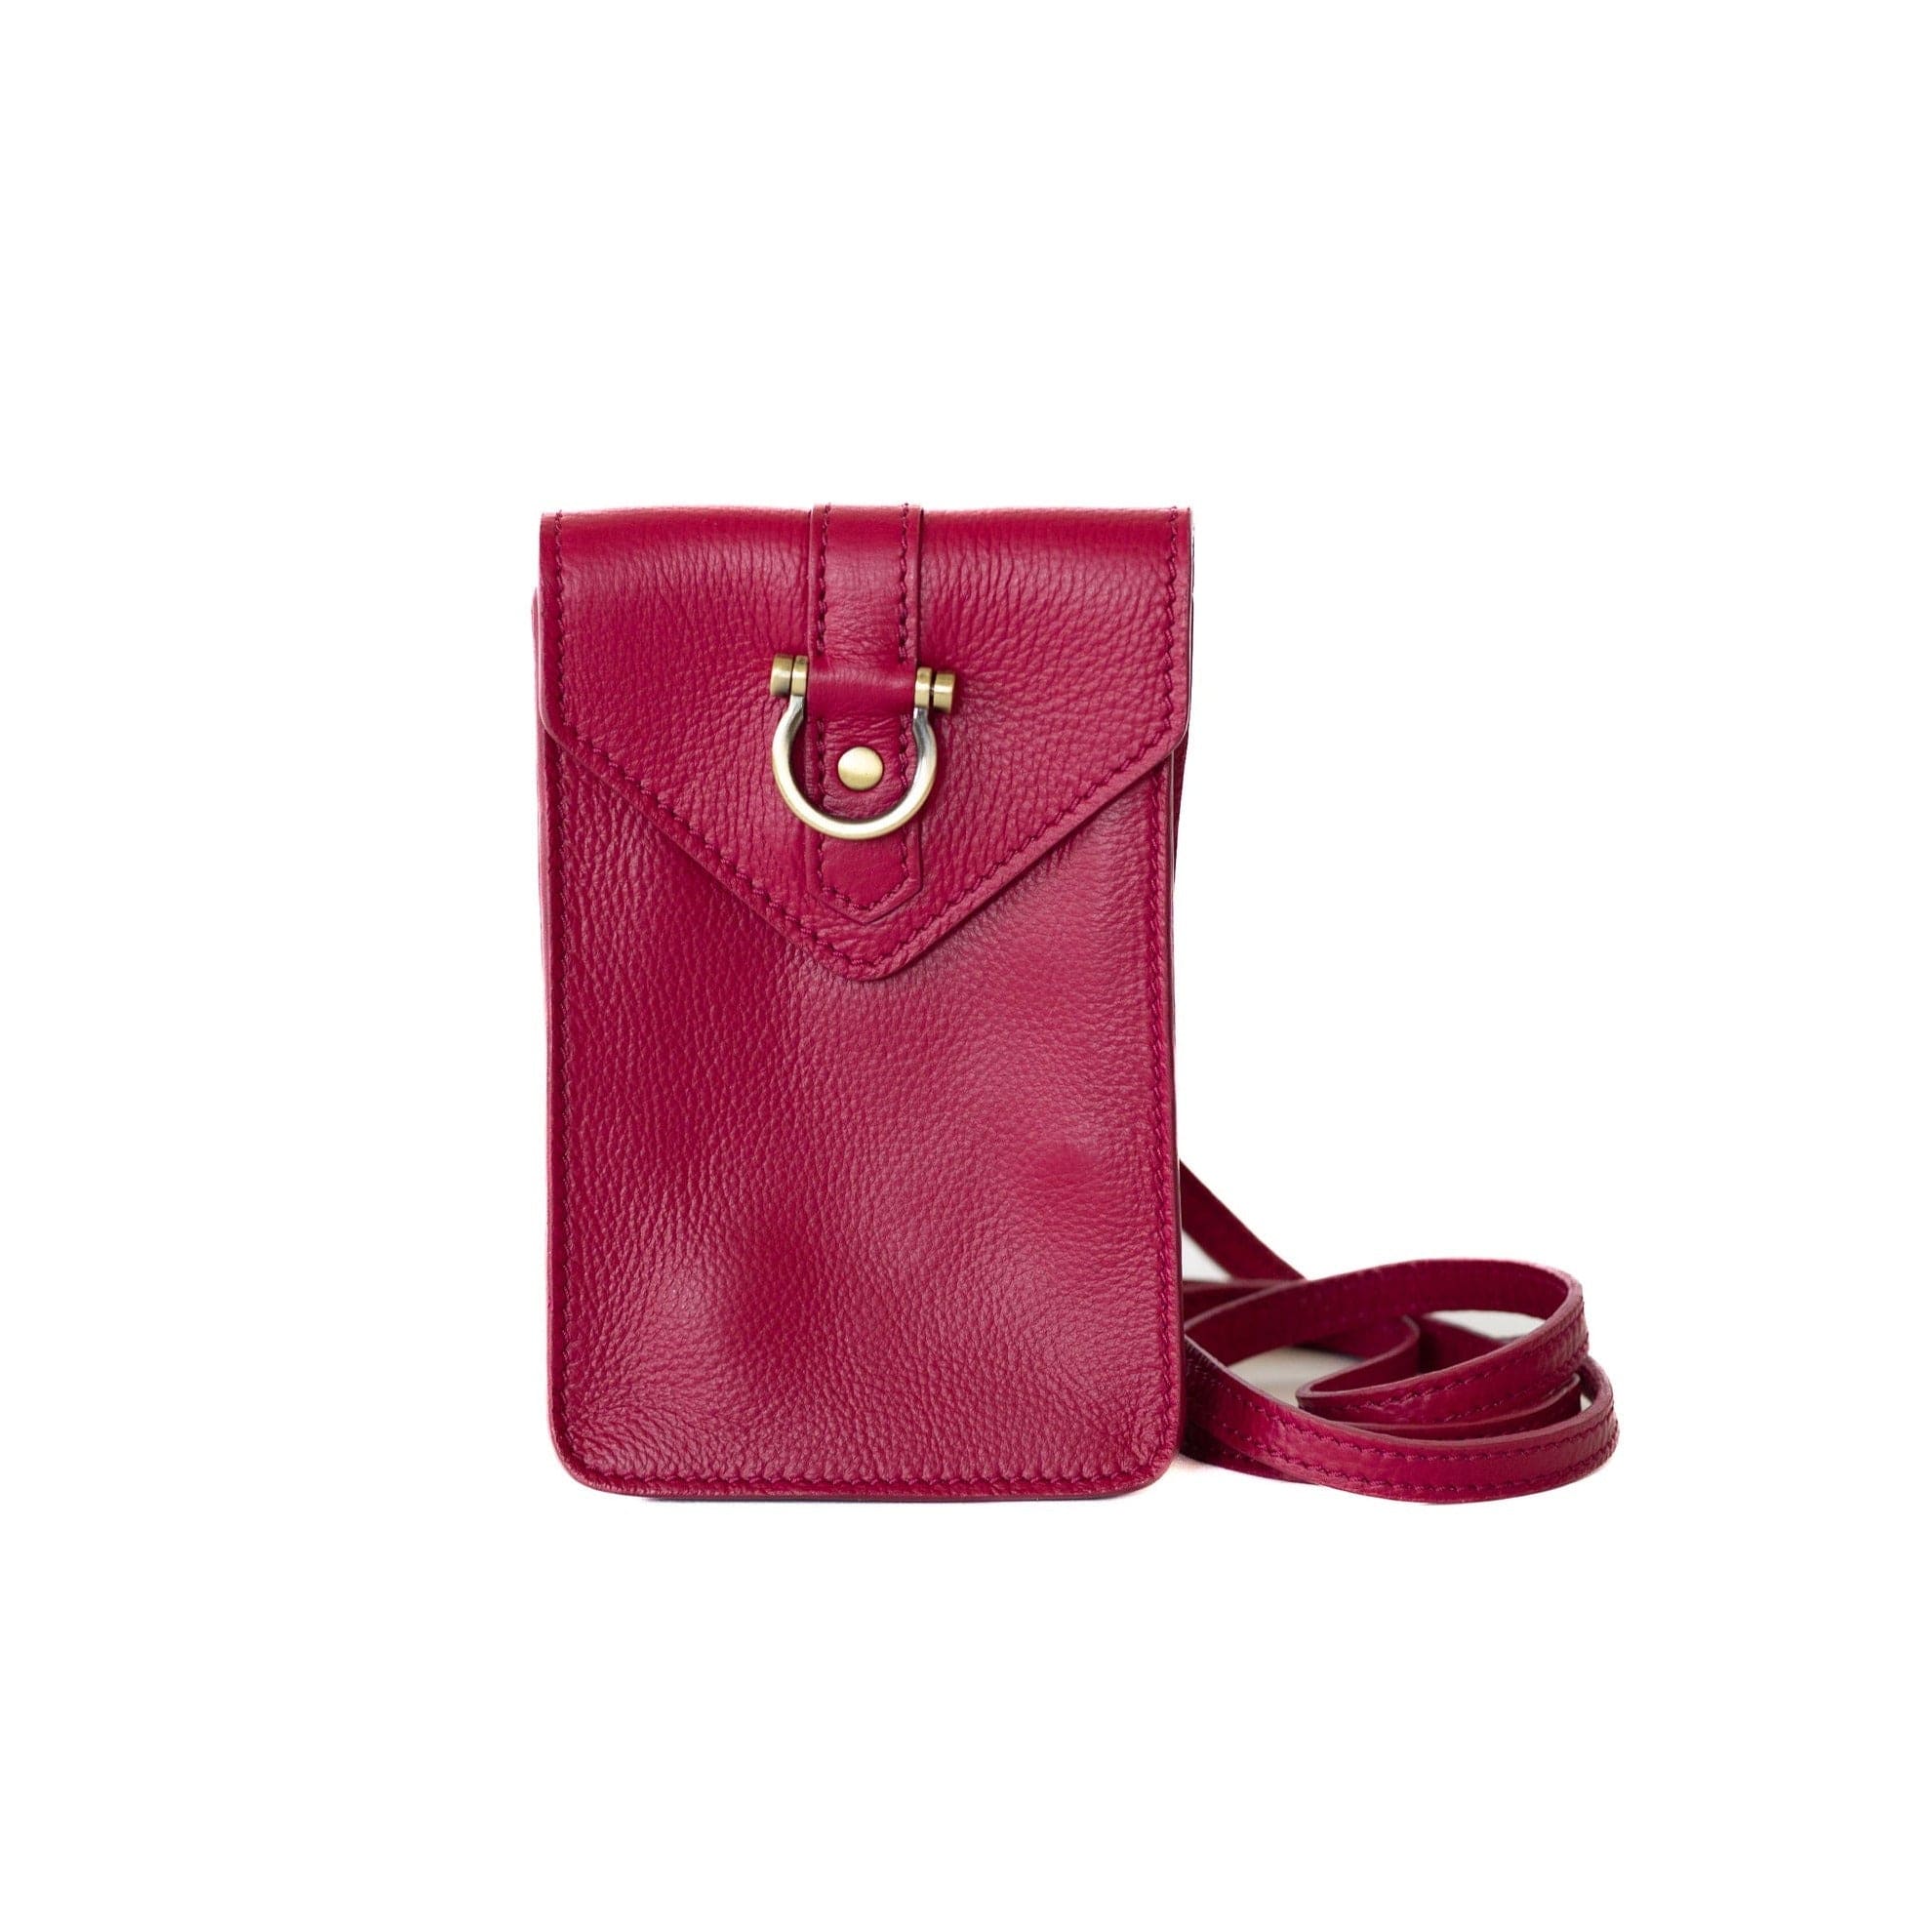 Shoppers Love This Madewell Leather Crossbody Bag